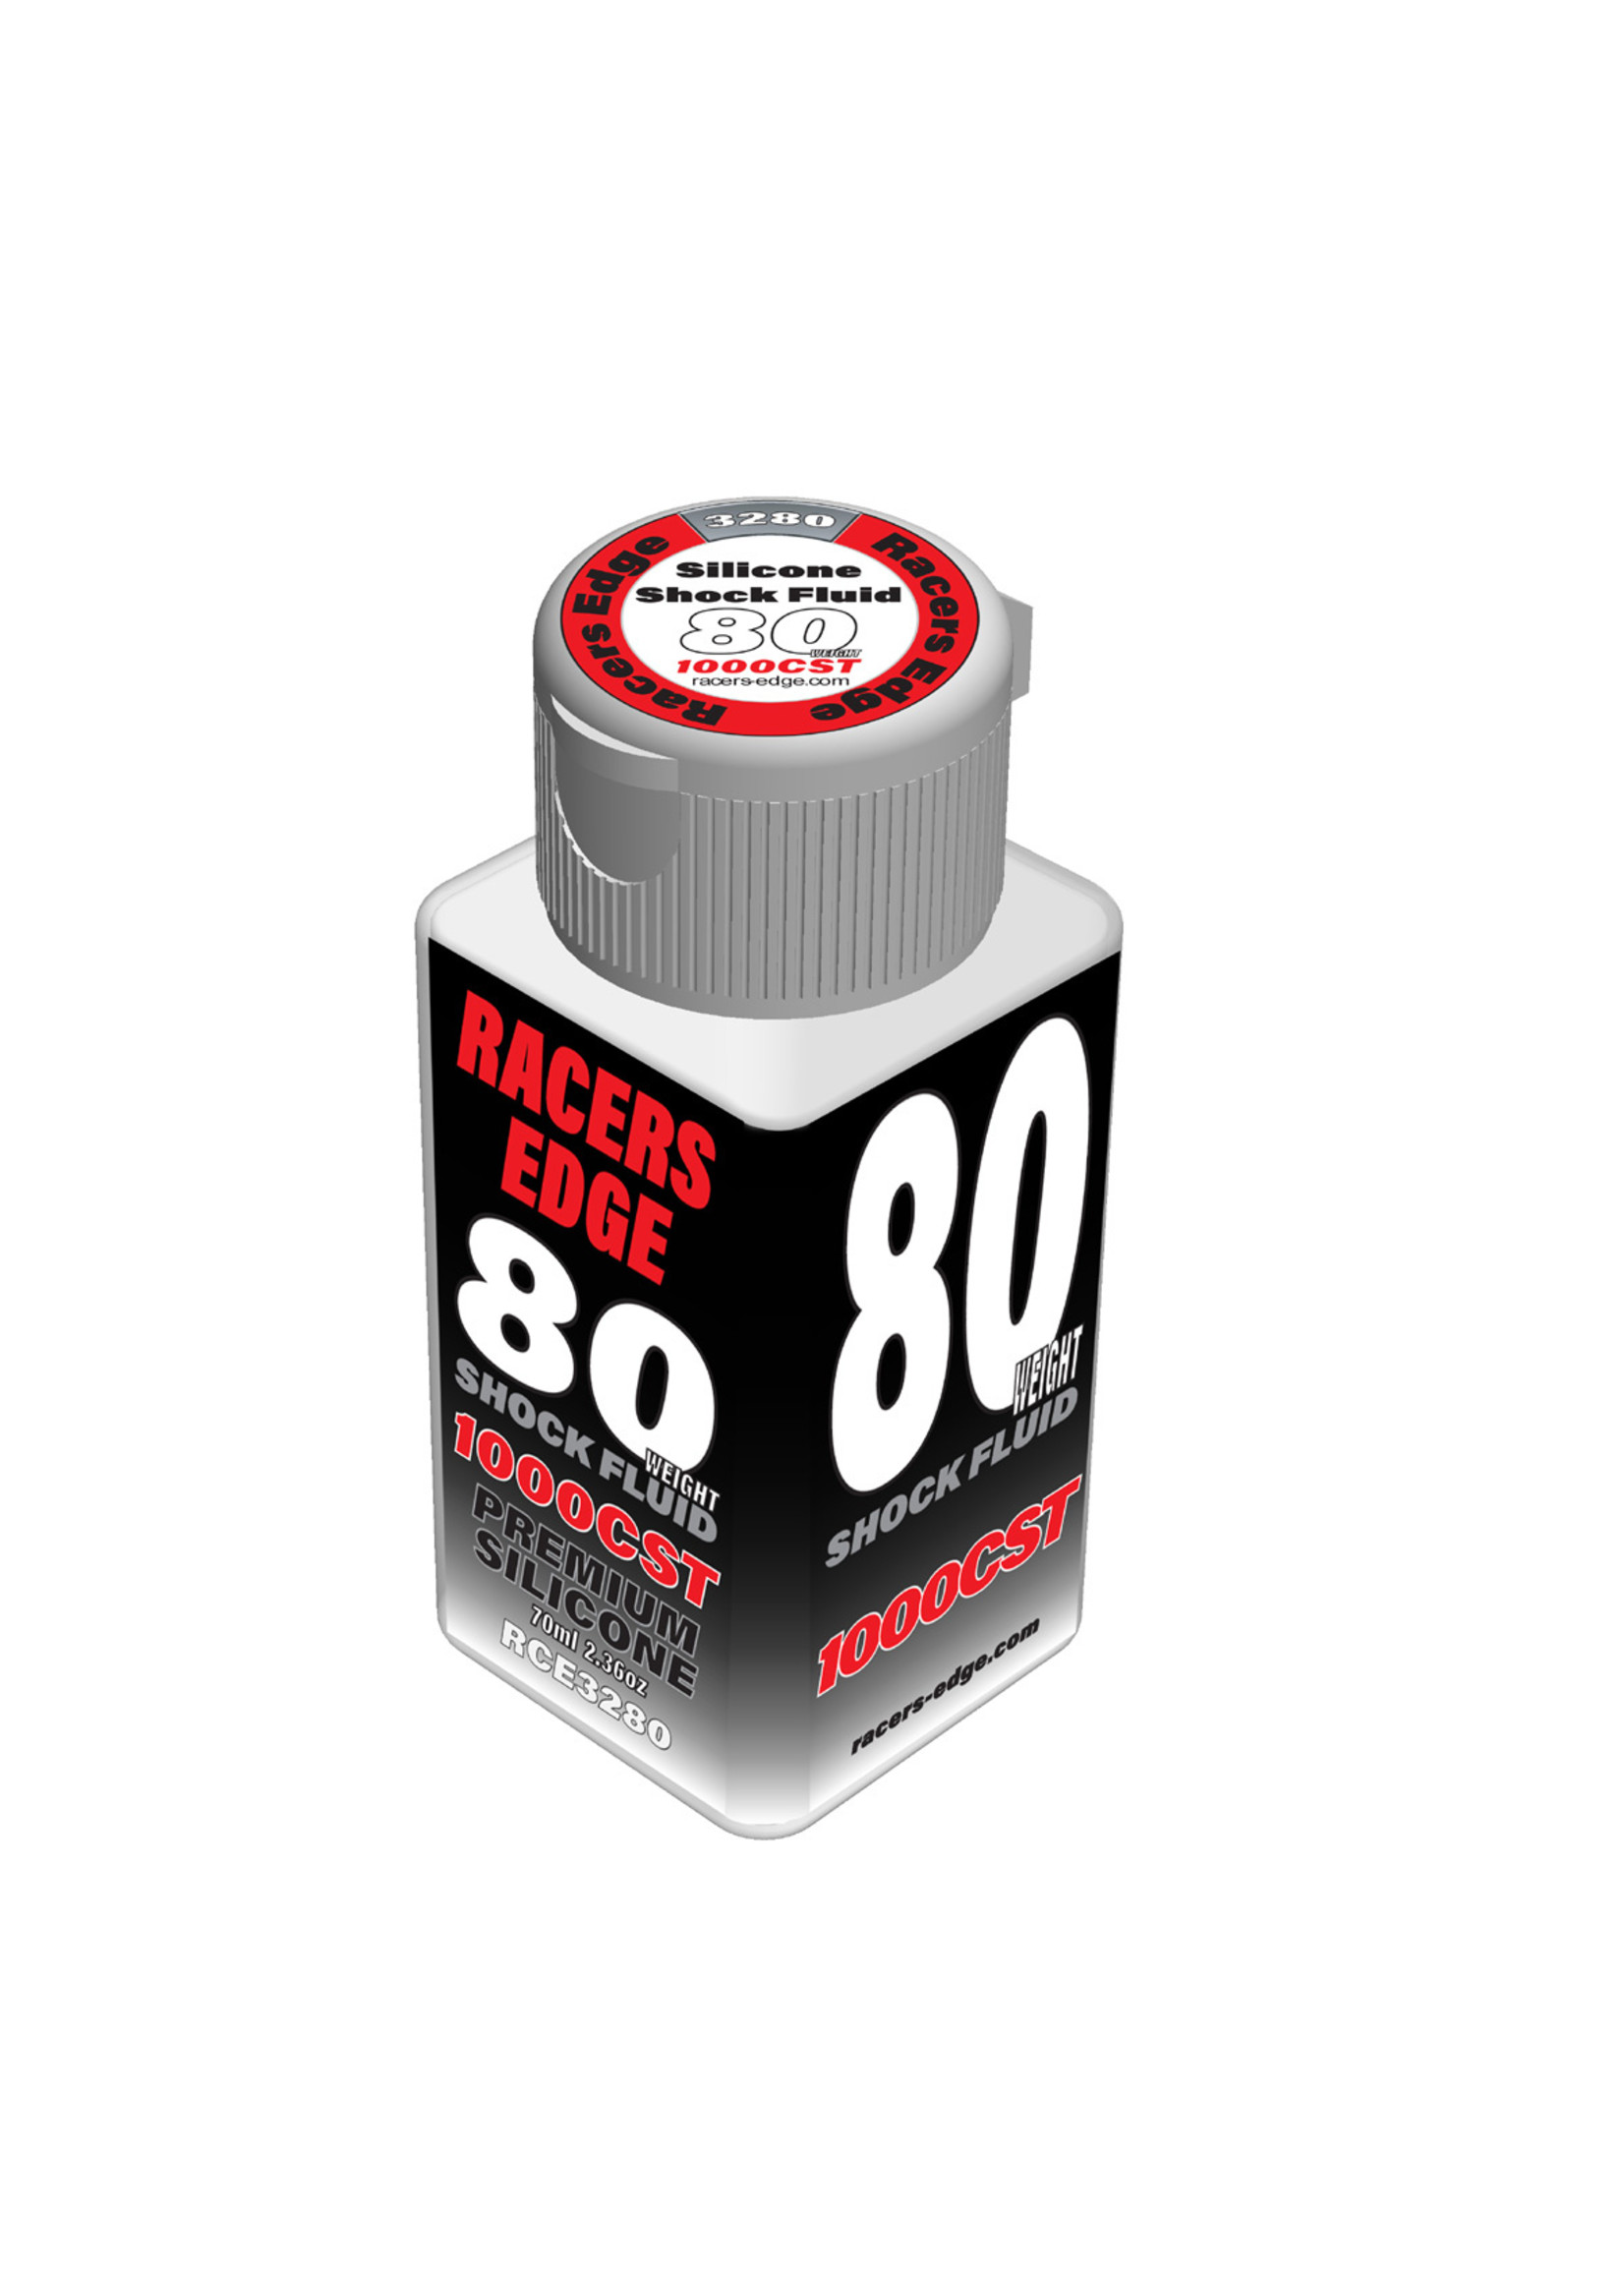 Racers Edge RCE3280 - 80 Weight, 1,000cSt, 70ml 2.36oz Pure Silicone Shock Oil